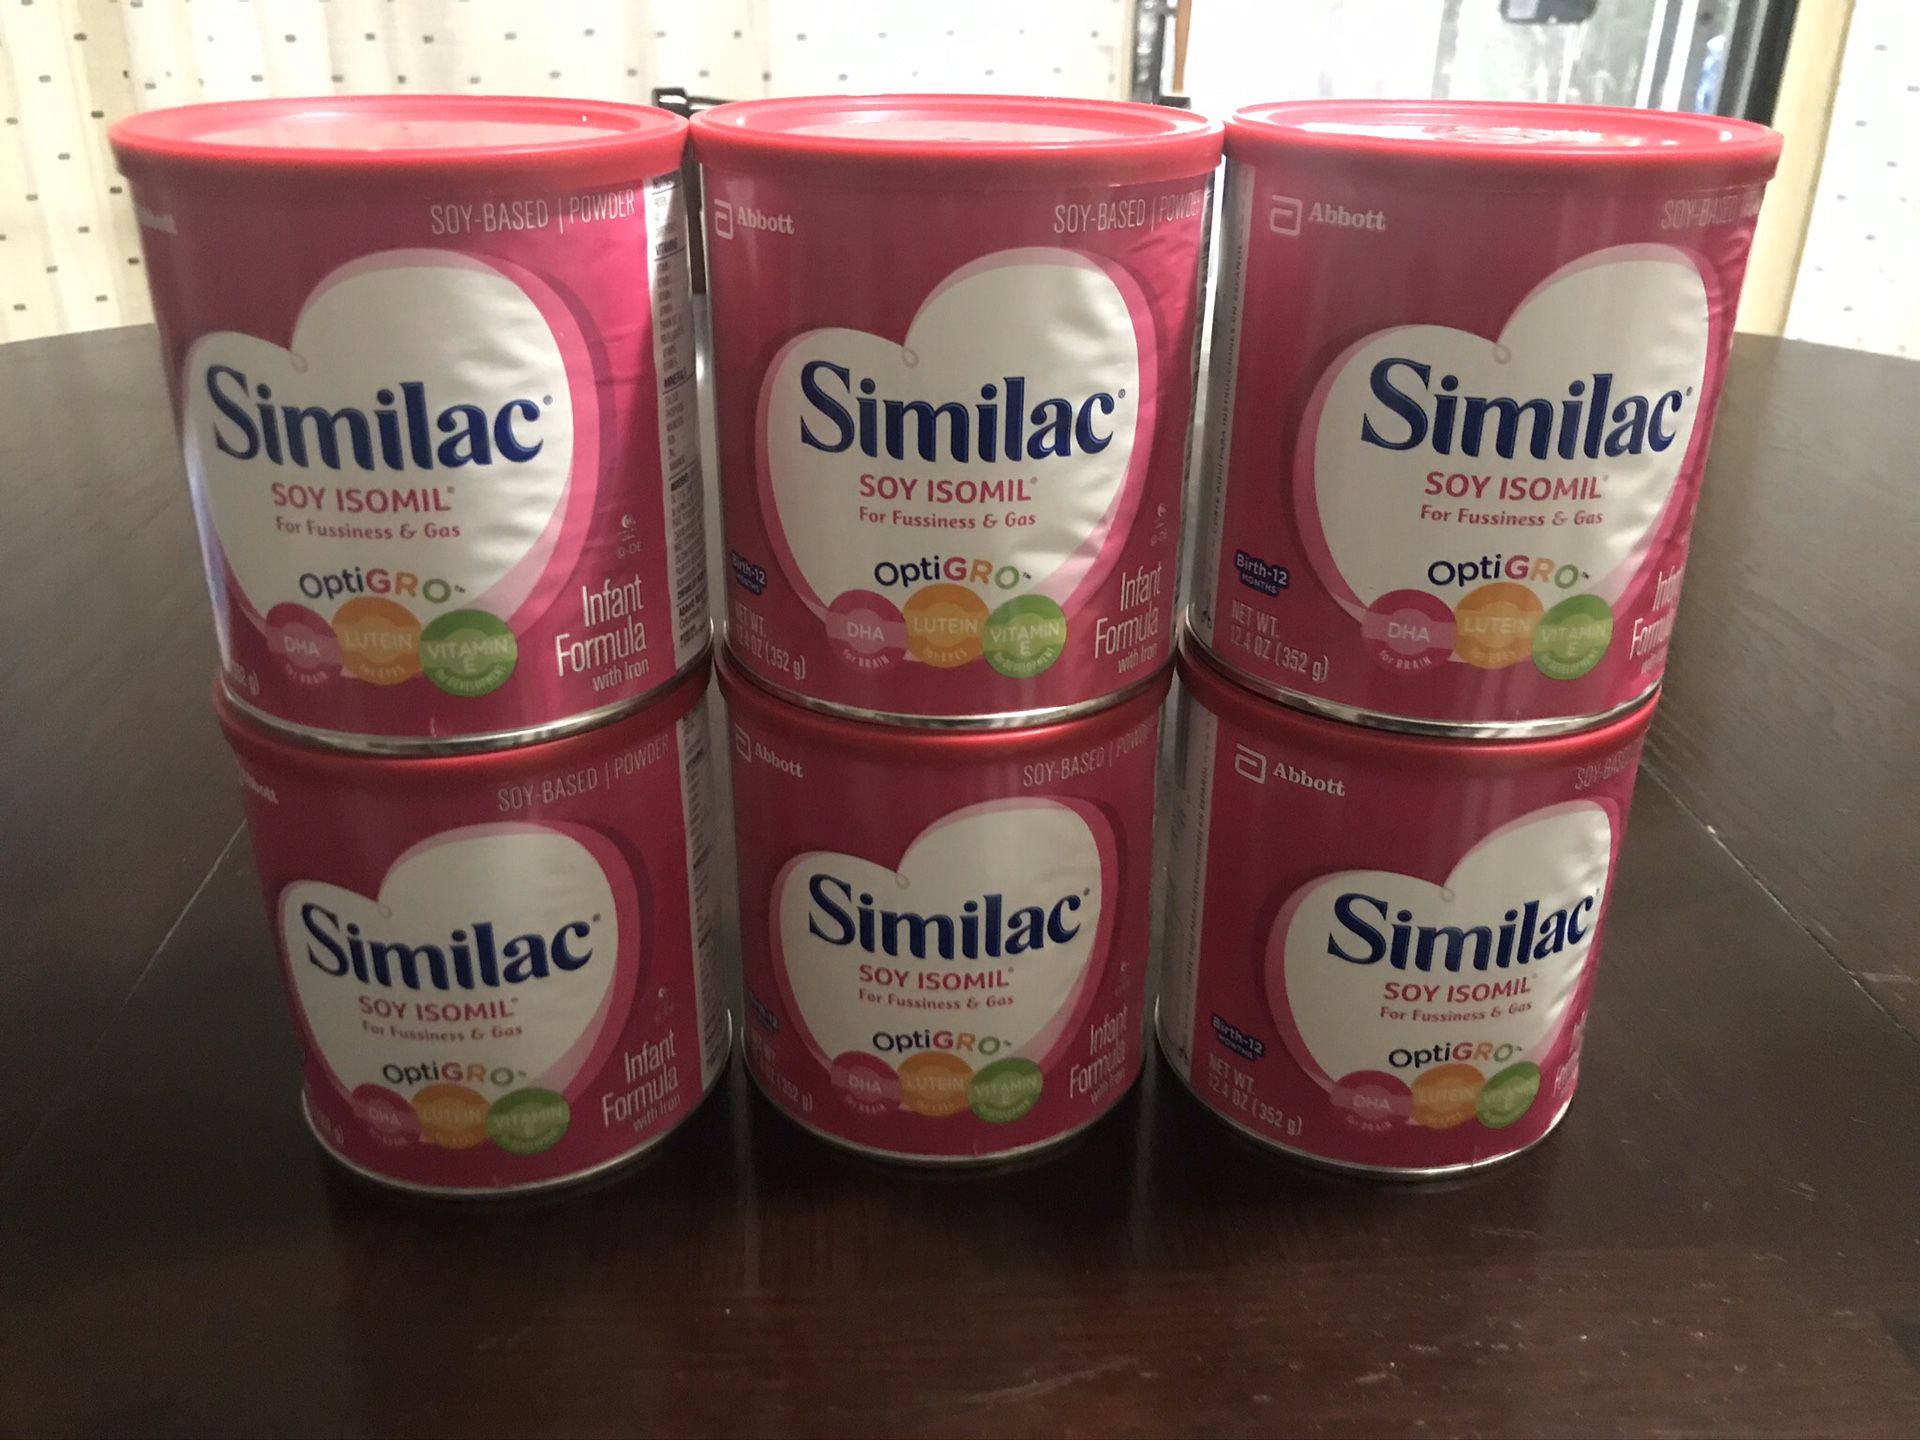 Similac soy isomil 25 cans